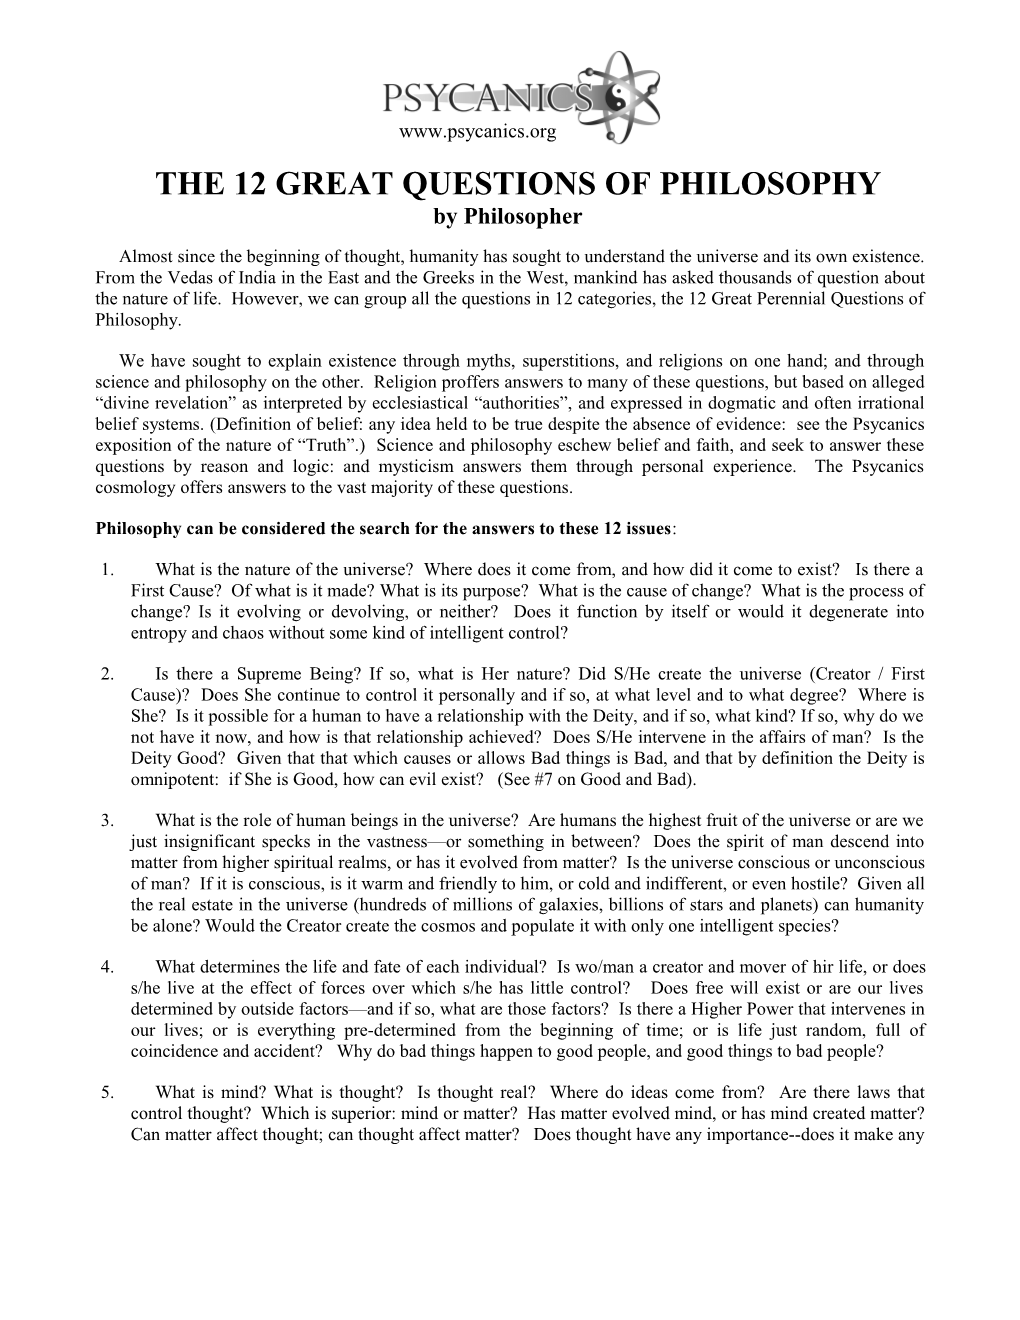 The 10 Major Questions of Philosophy